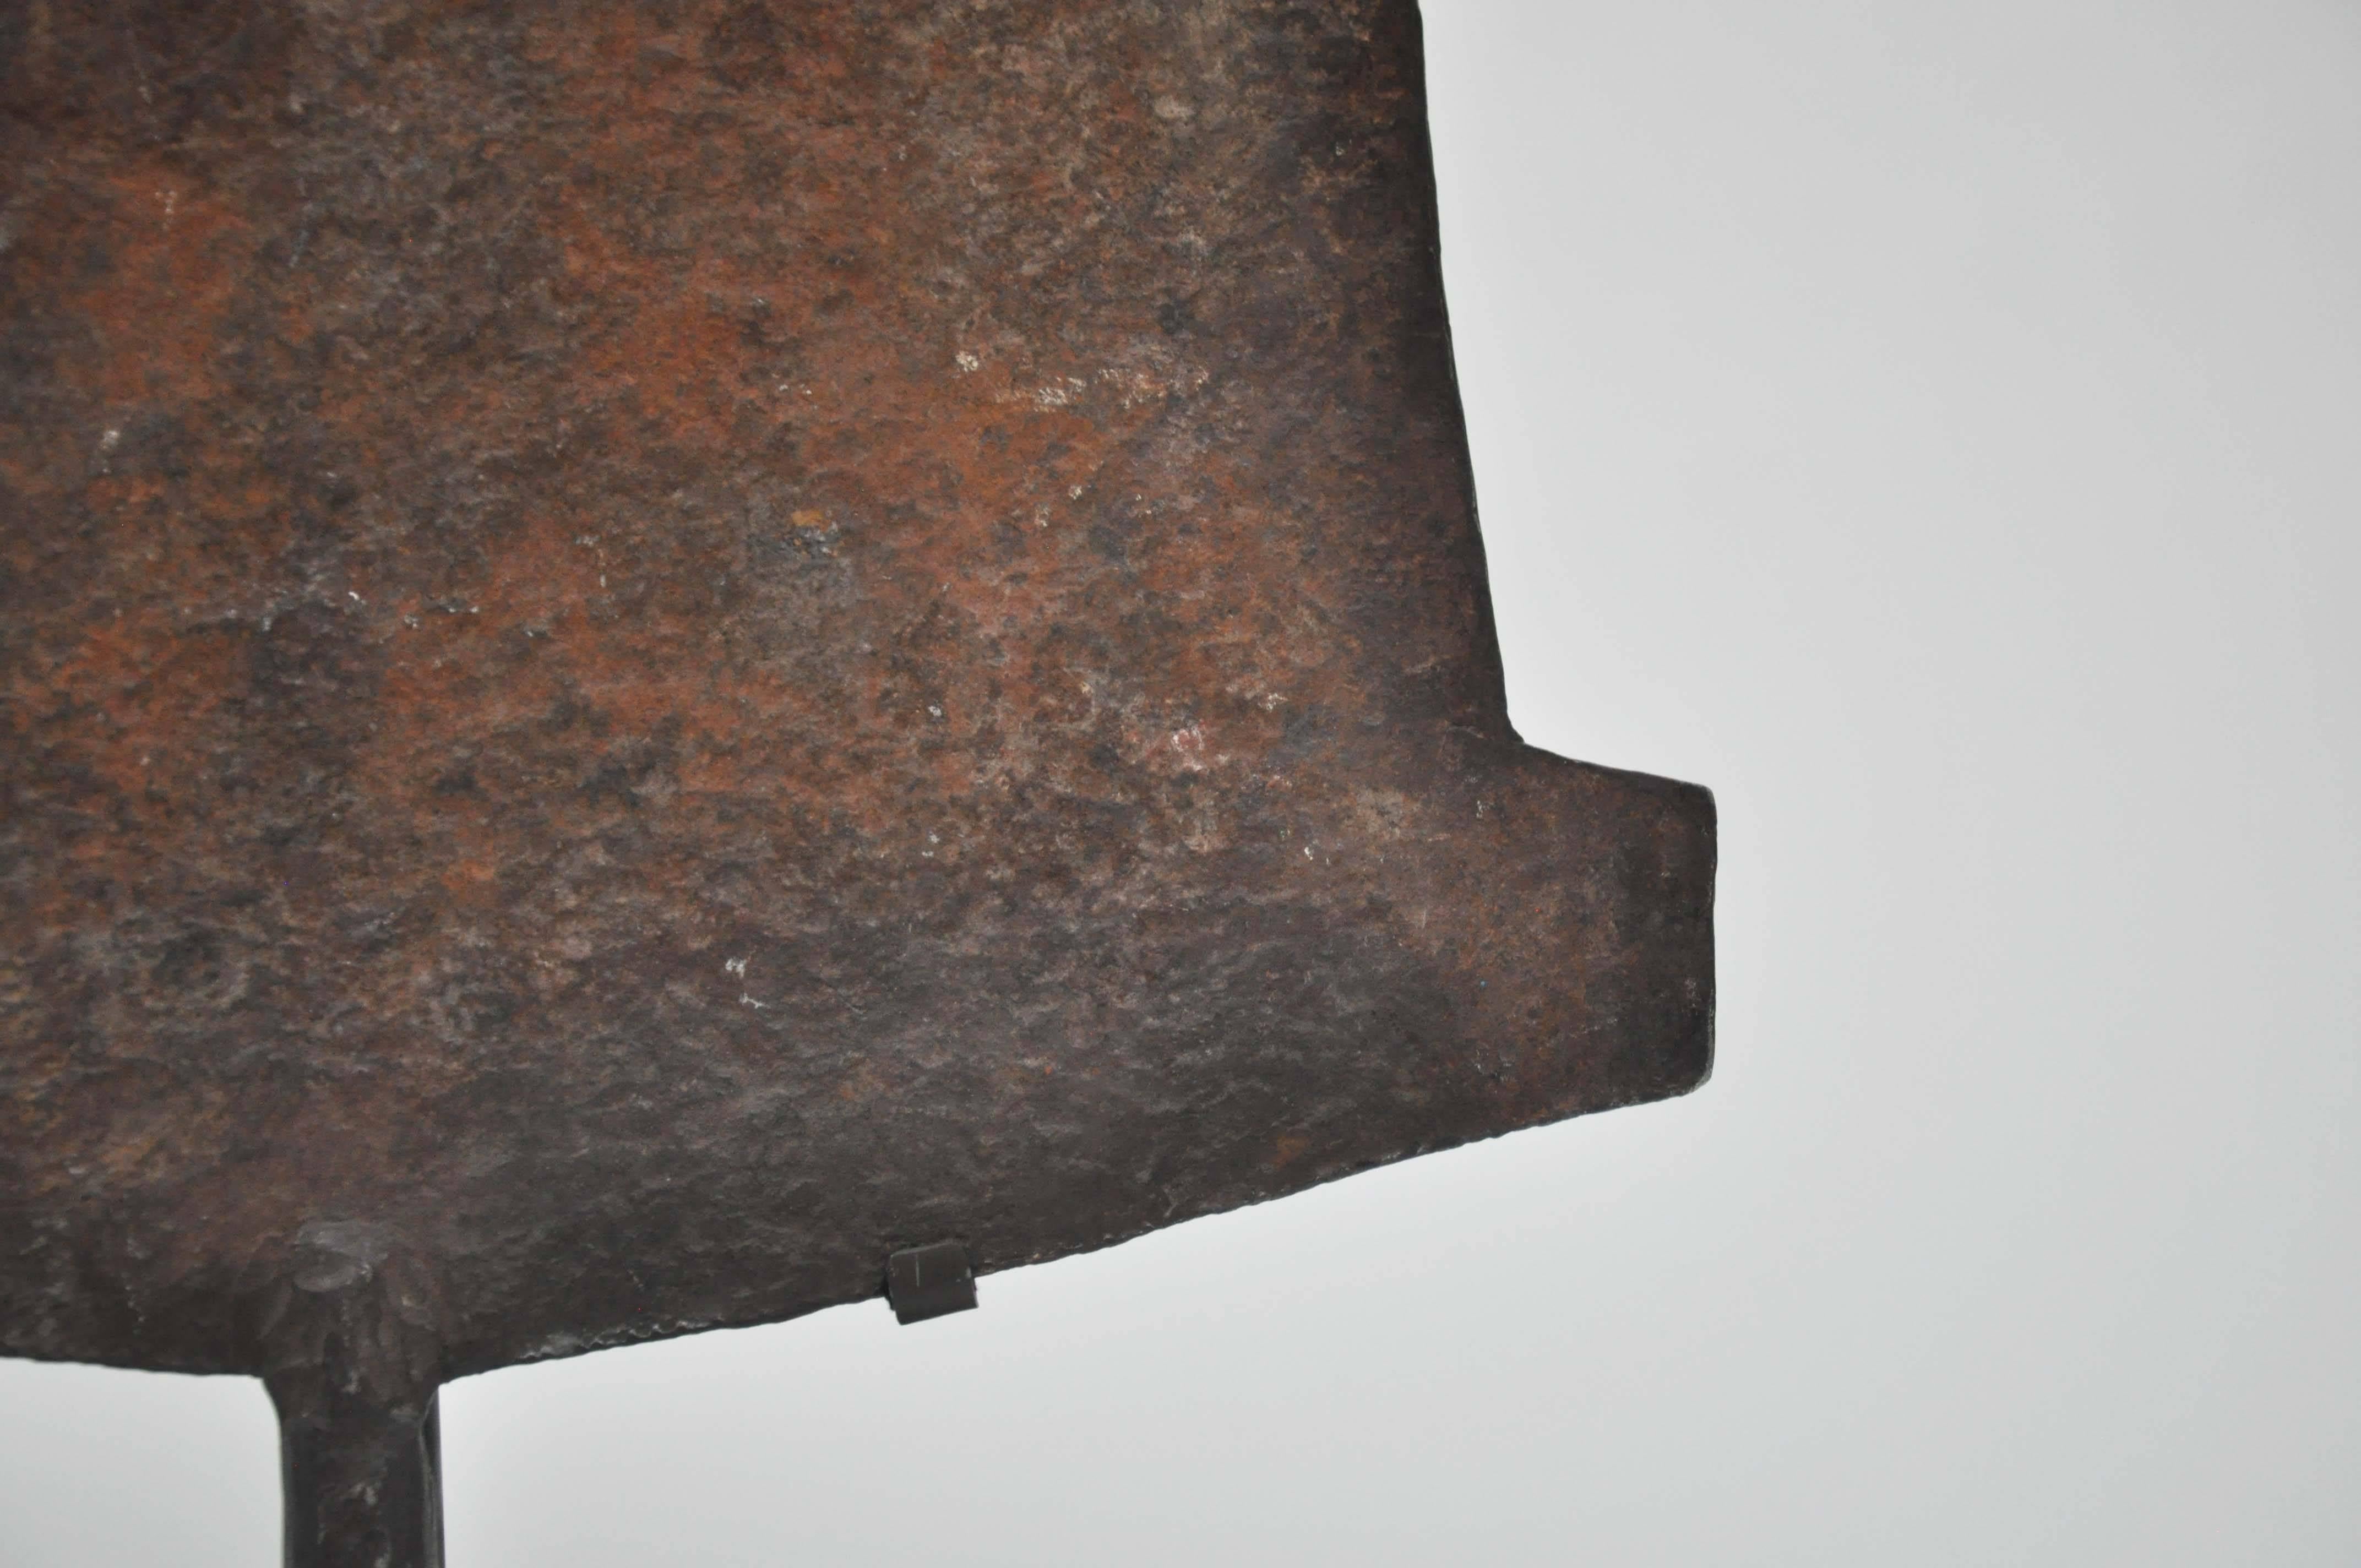  Early 19th Century Nigerian Iron Shield/Currency In Good Condition For Sale In Chicago, IL